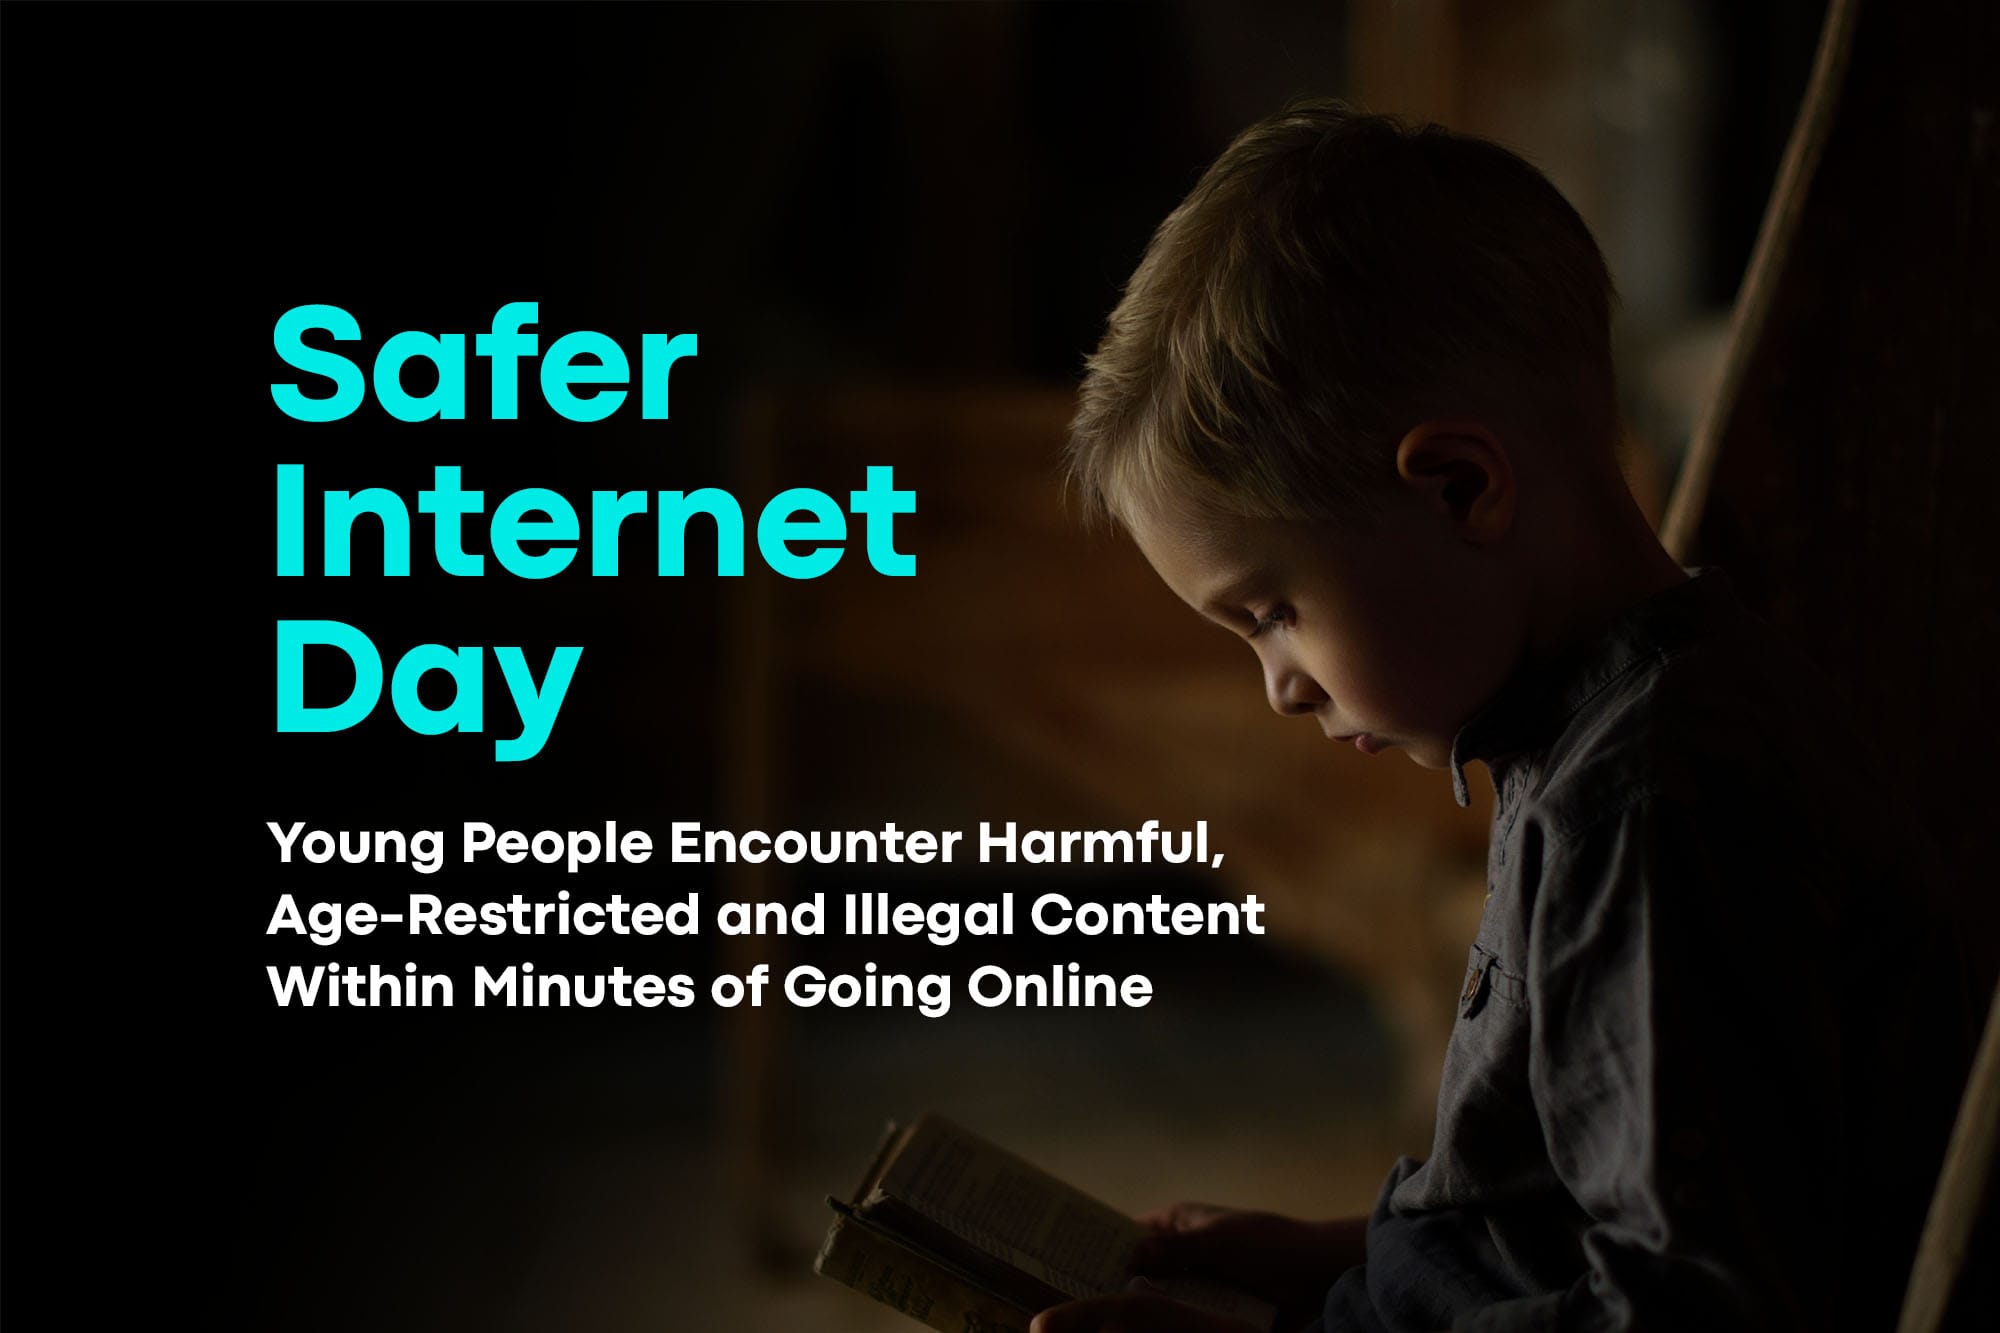 Young People Encounter Harmful, Age-Restricted and Illegal Content Within Minutes of Going Online